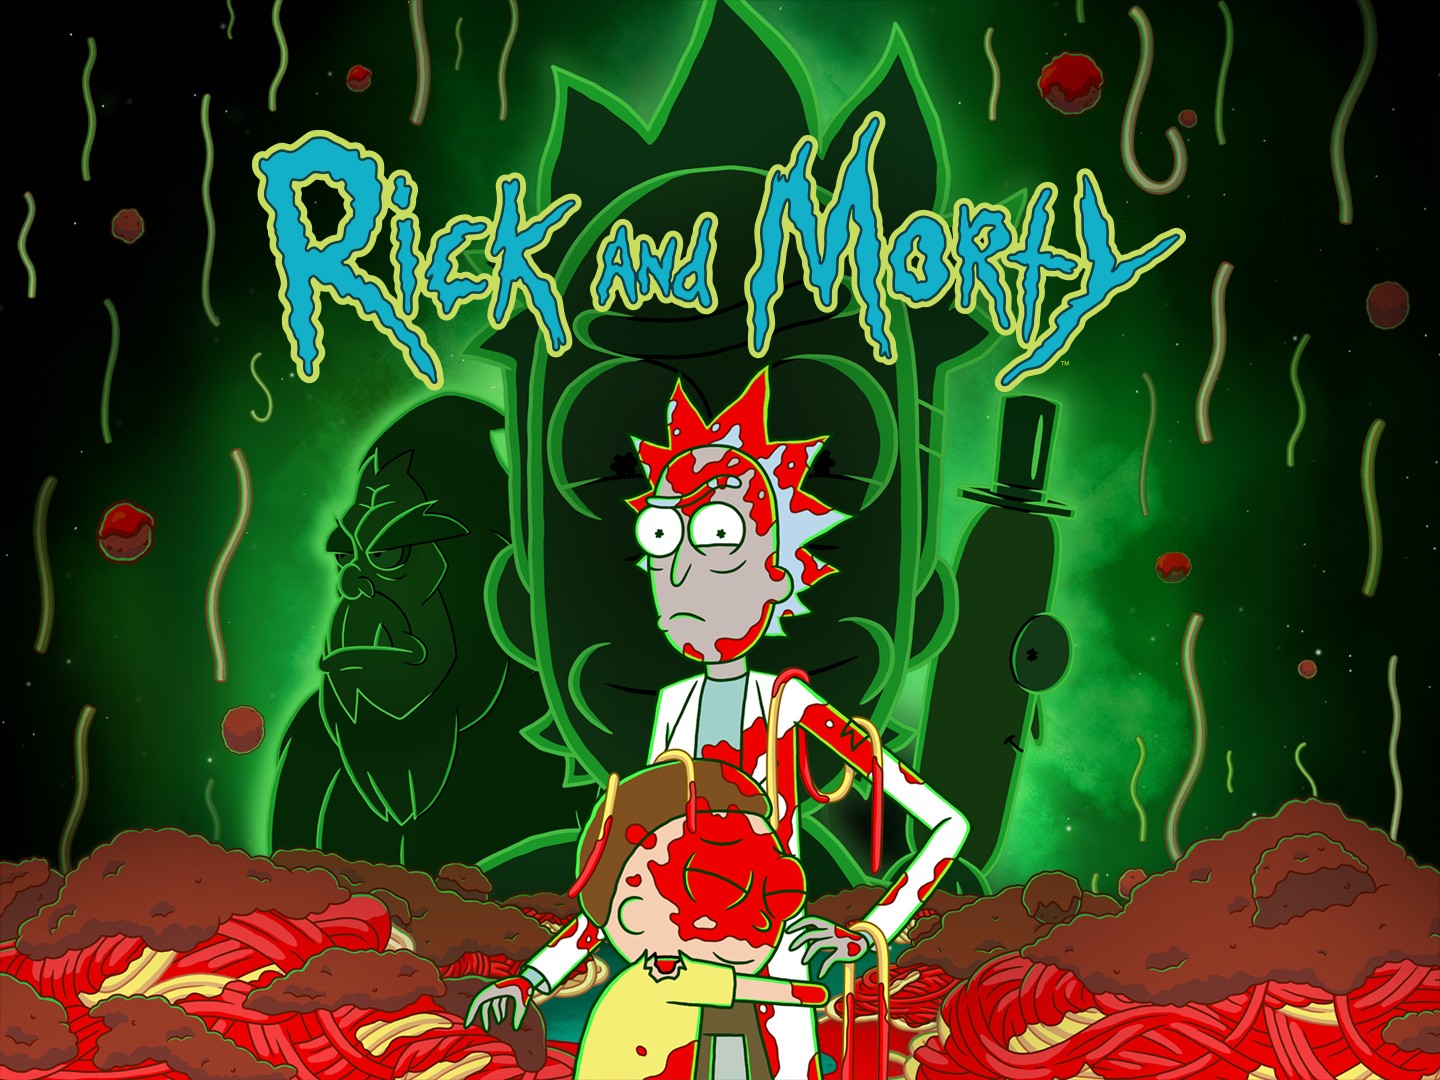 Rick and Morty' Season 7 Episode 9 free live stream: How to watch